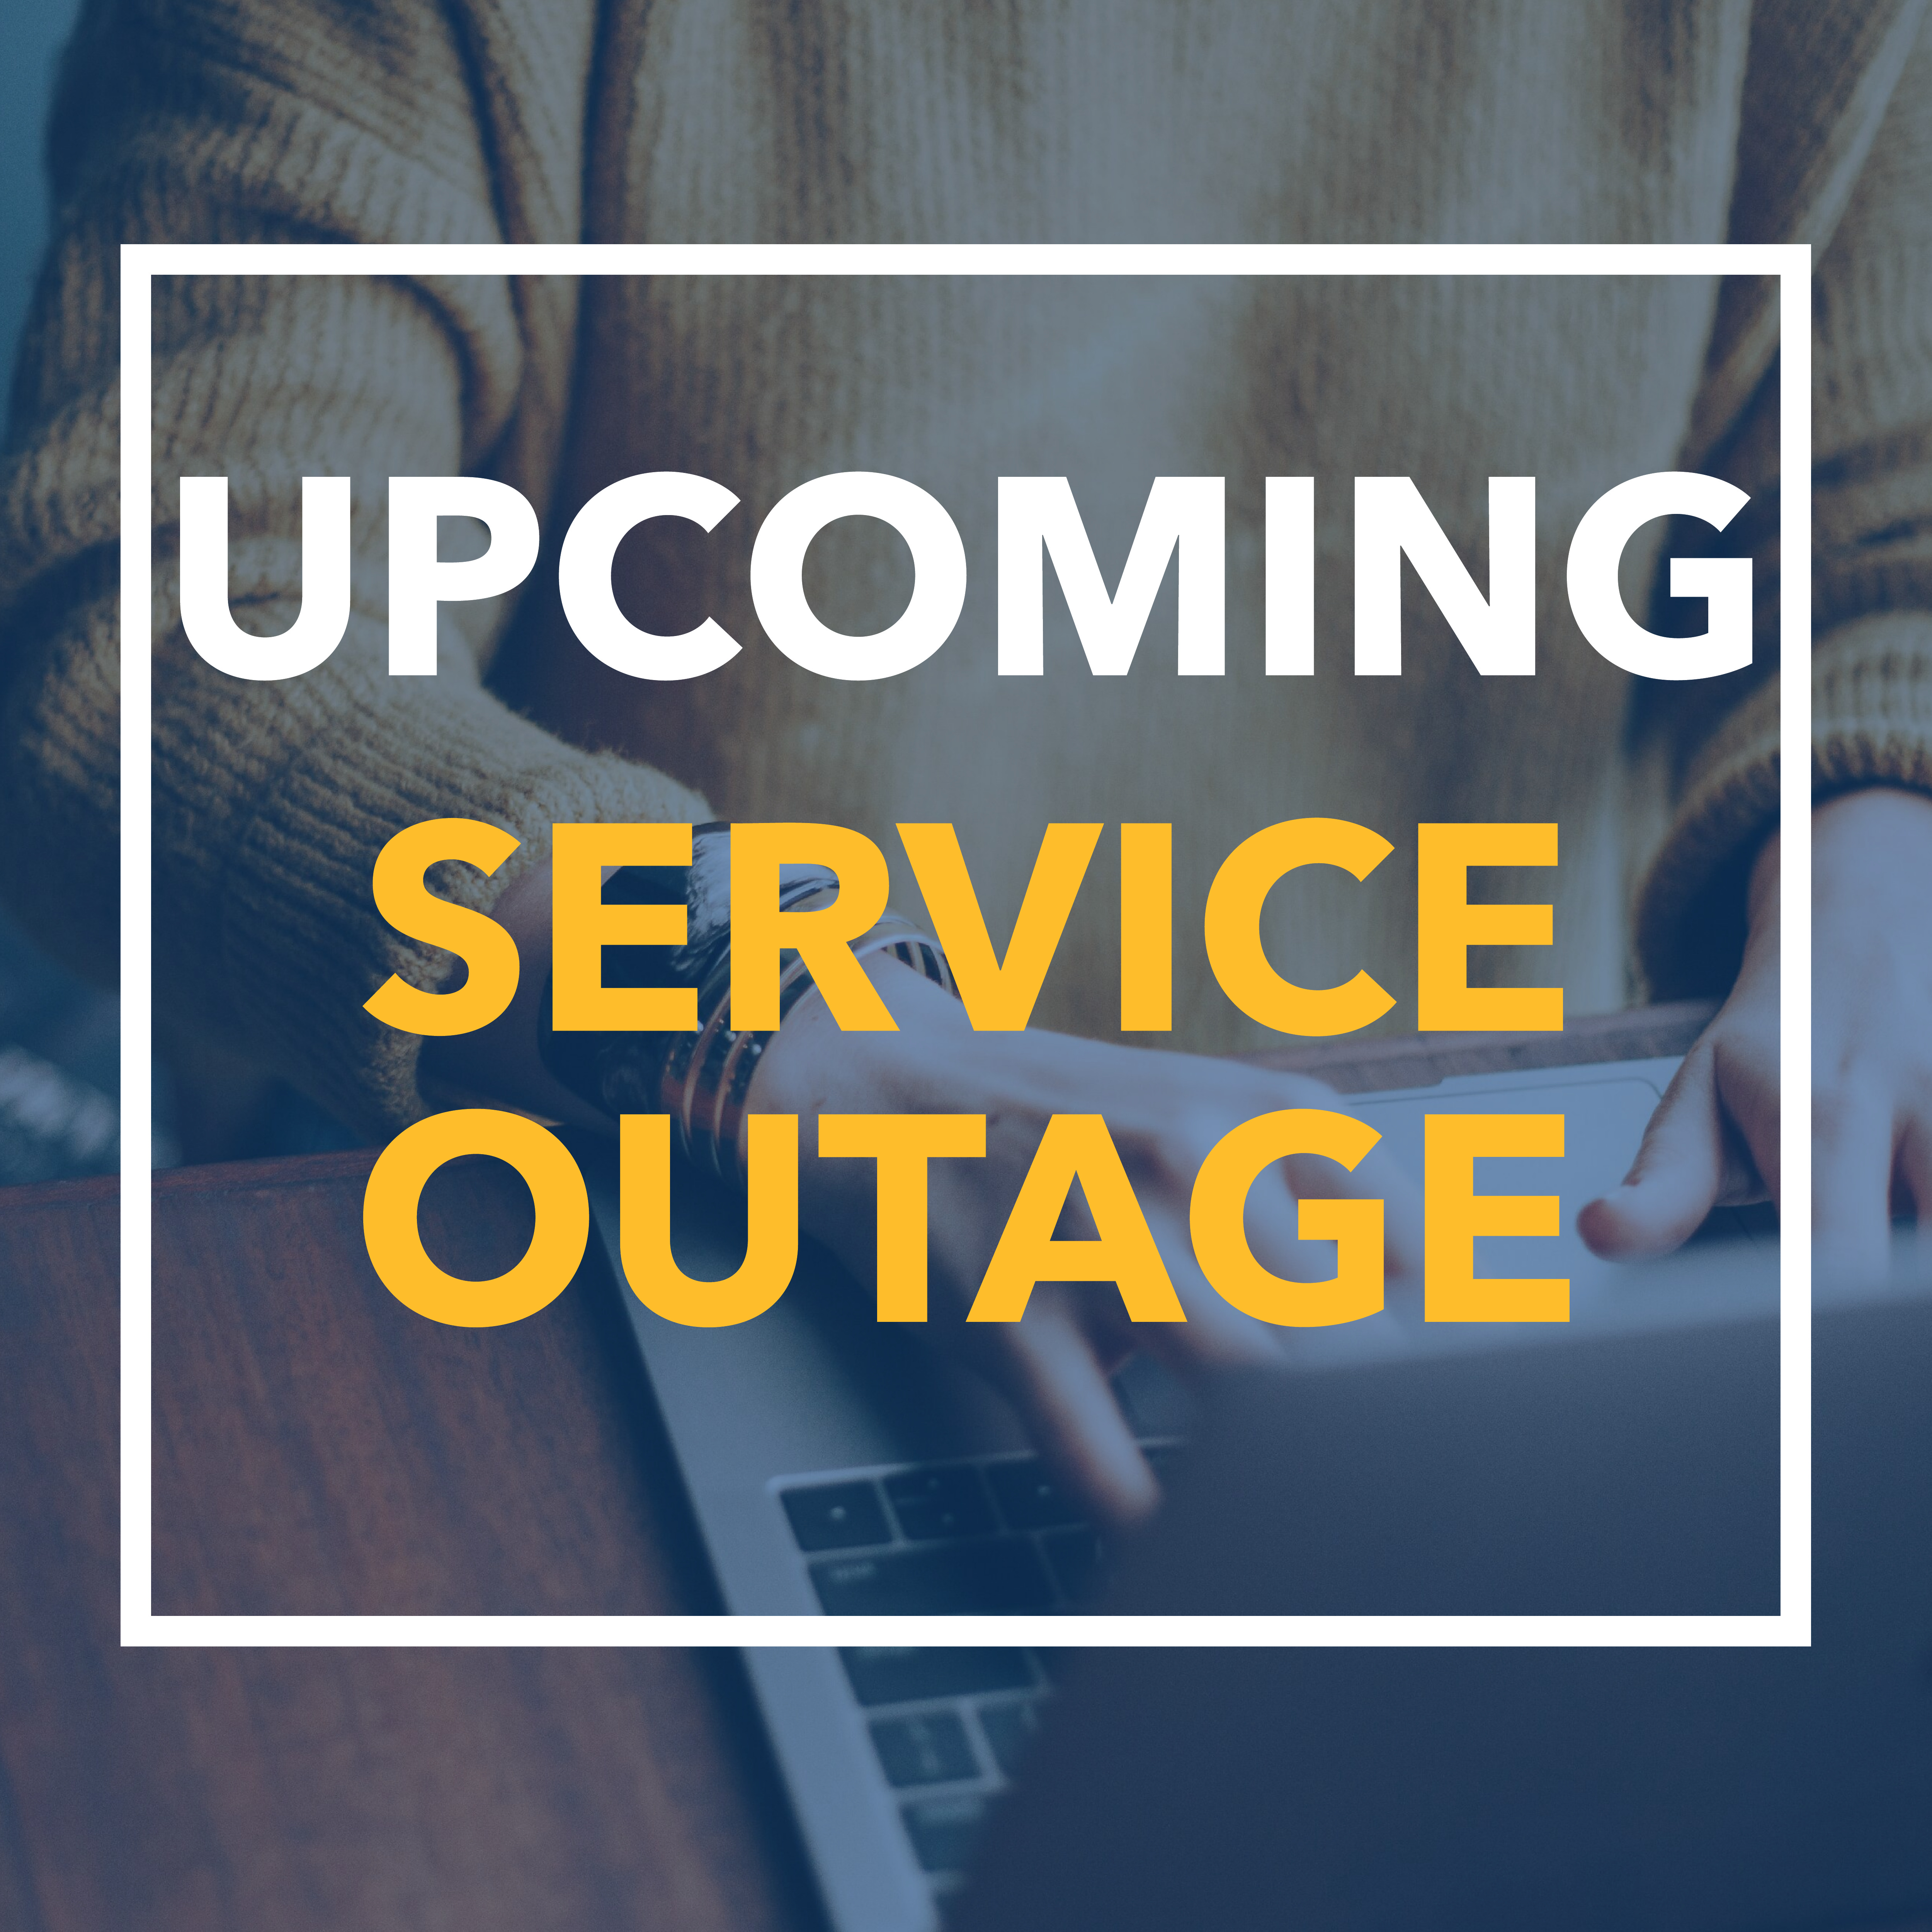 Upcoming Service Outage